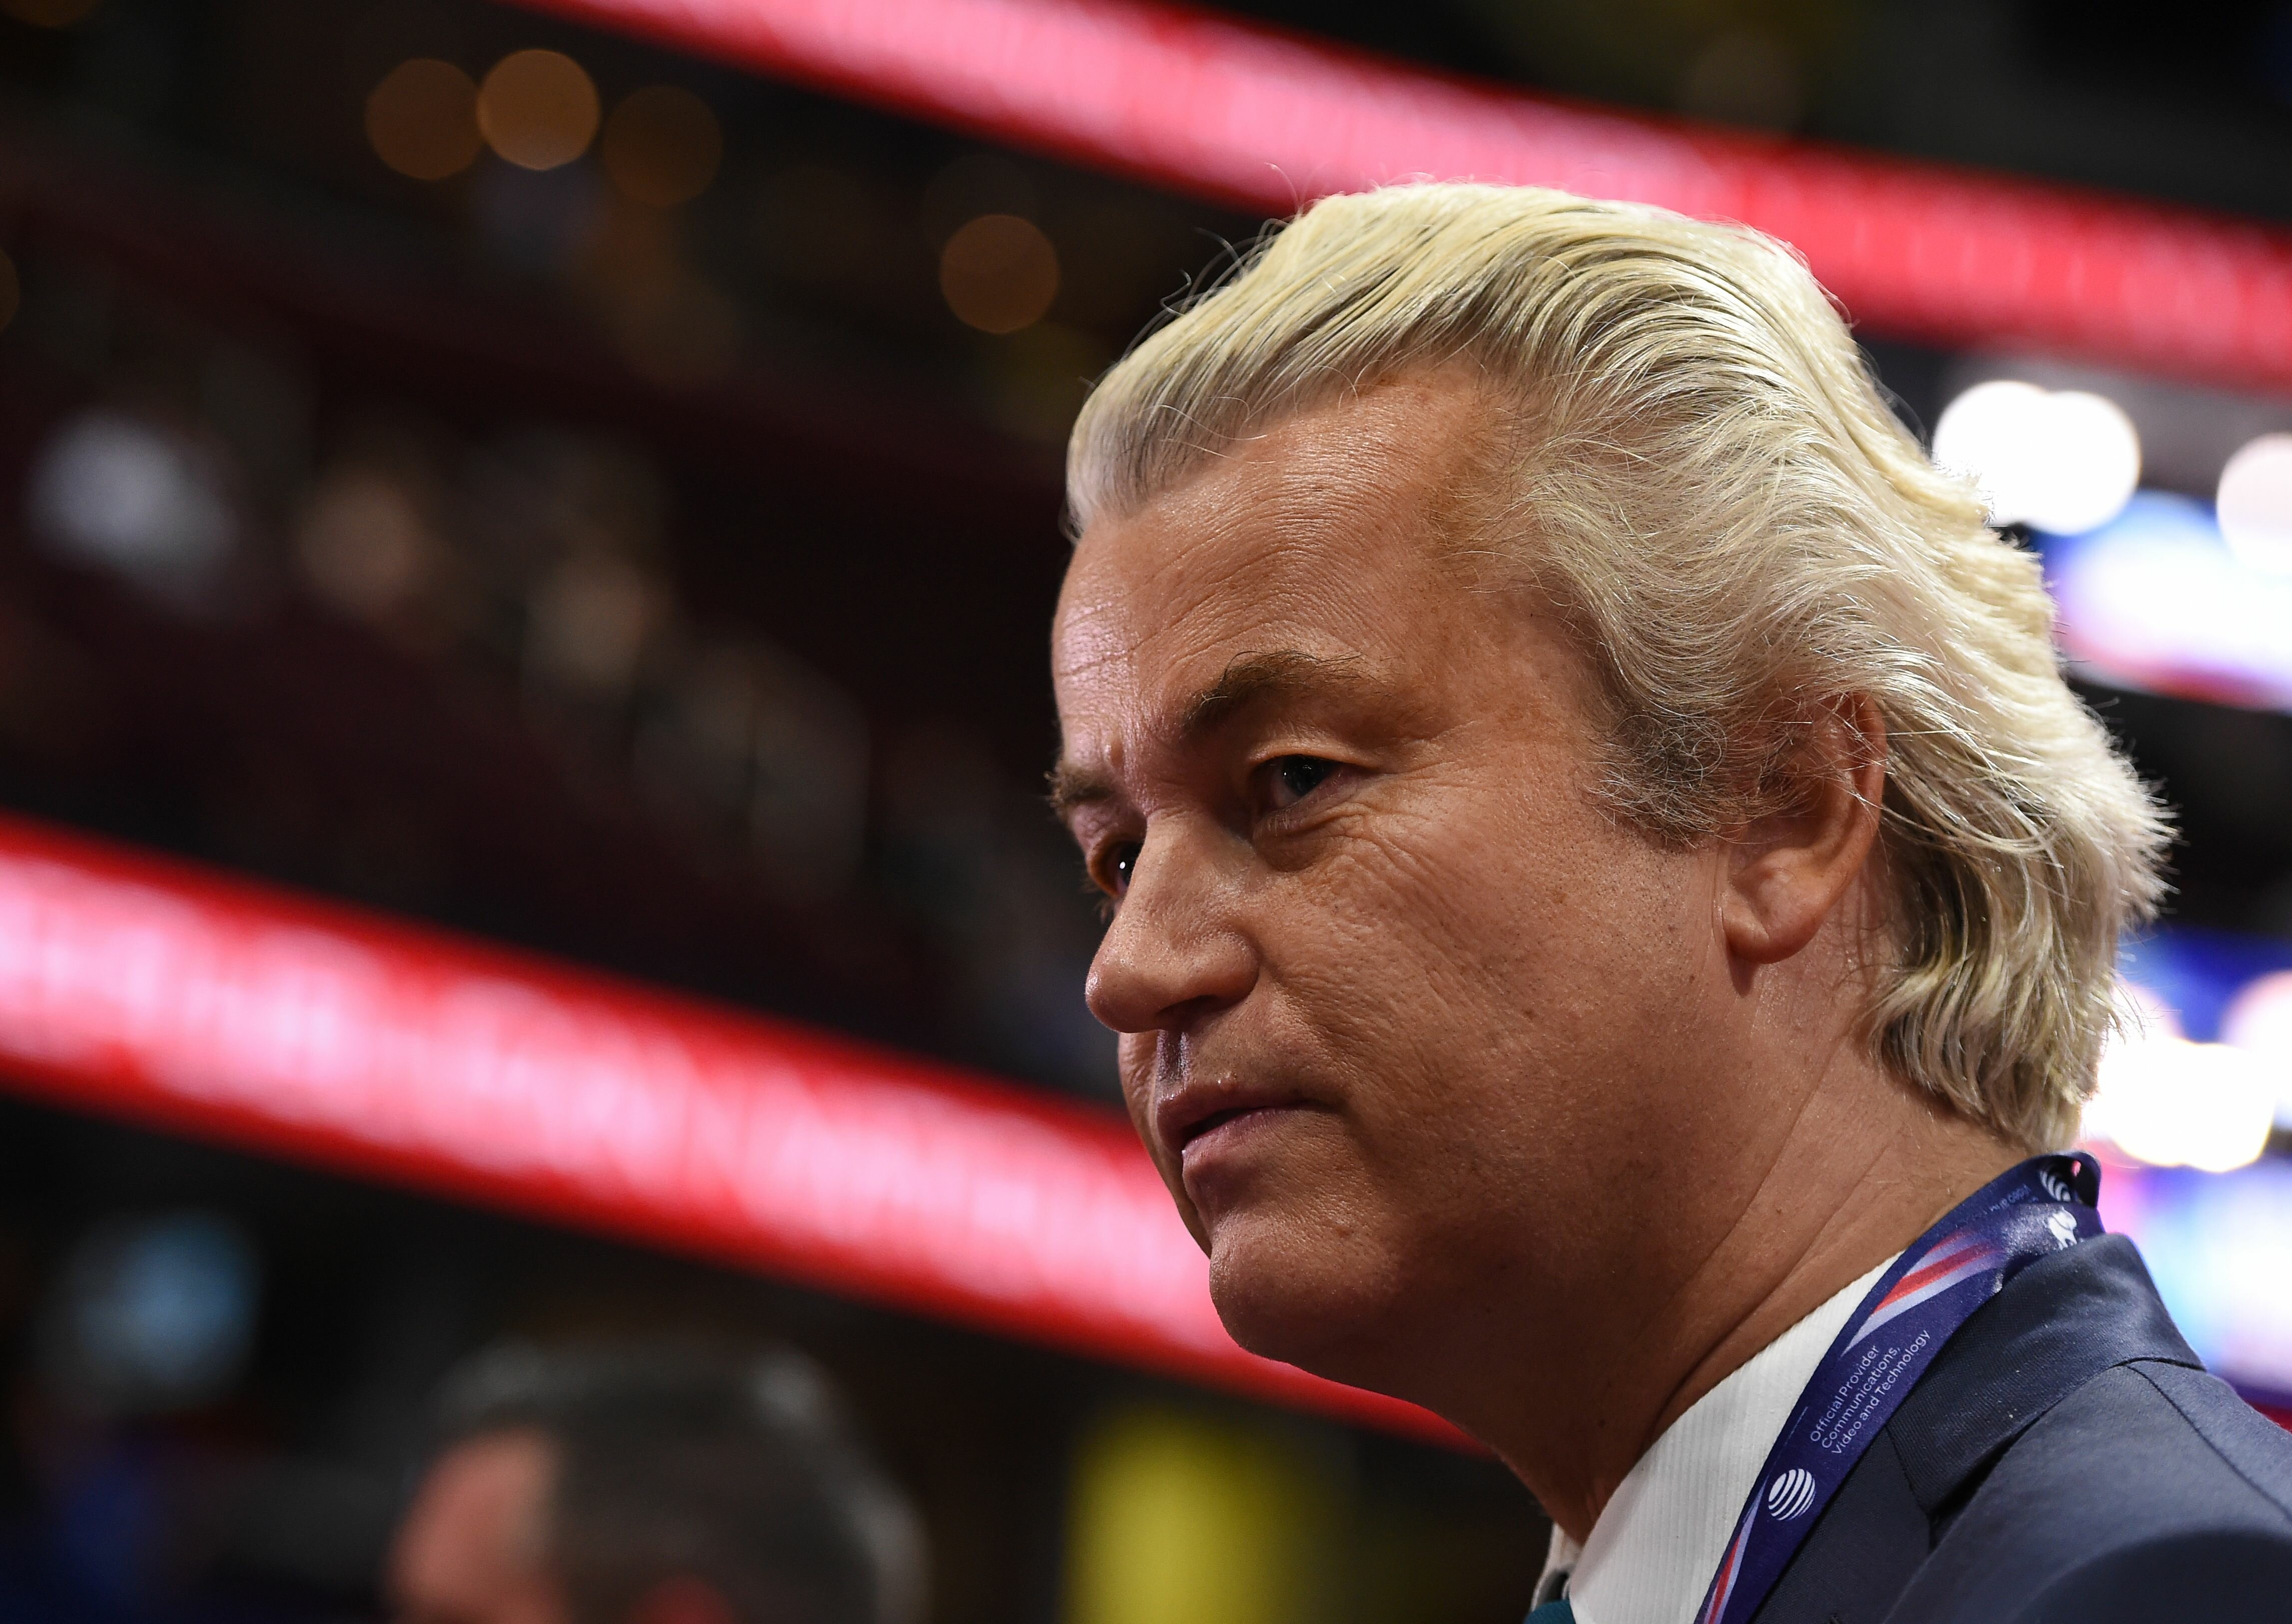 Dutch politician Gert Wilders is seen on the convention floor before the start of the second day of the Republican National Convention on July 19, 2016 at Quicken Loans Arena in Cleveland, Ohio. About 50,000 people are expected in Cleveland this week for the Republican National Convention, at which Donald Trump is expected to be formally nominated to run for the US presidency in November. / AFP / Robyn BECK (Photo credit should read ROBYN BECK/AFP/Getty Images)